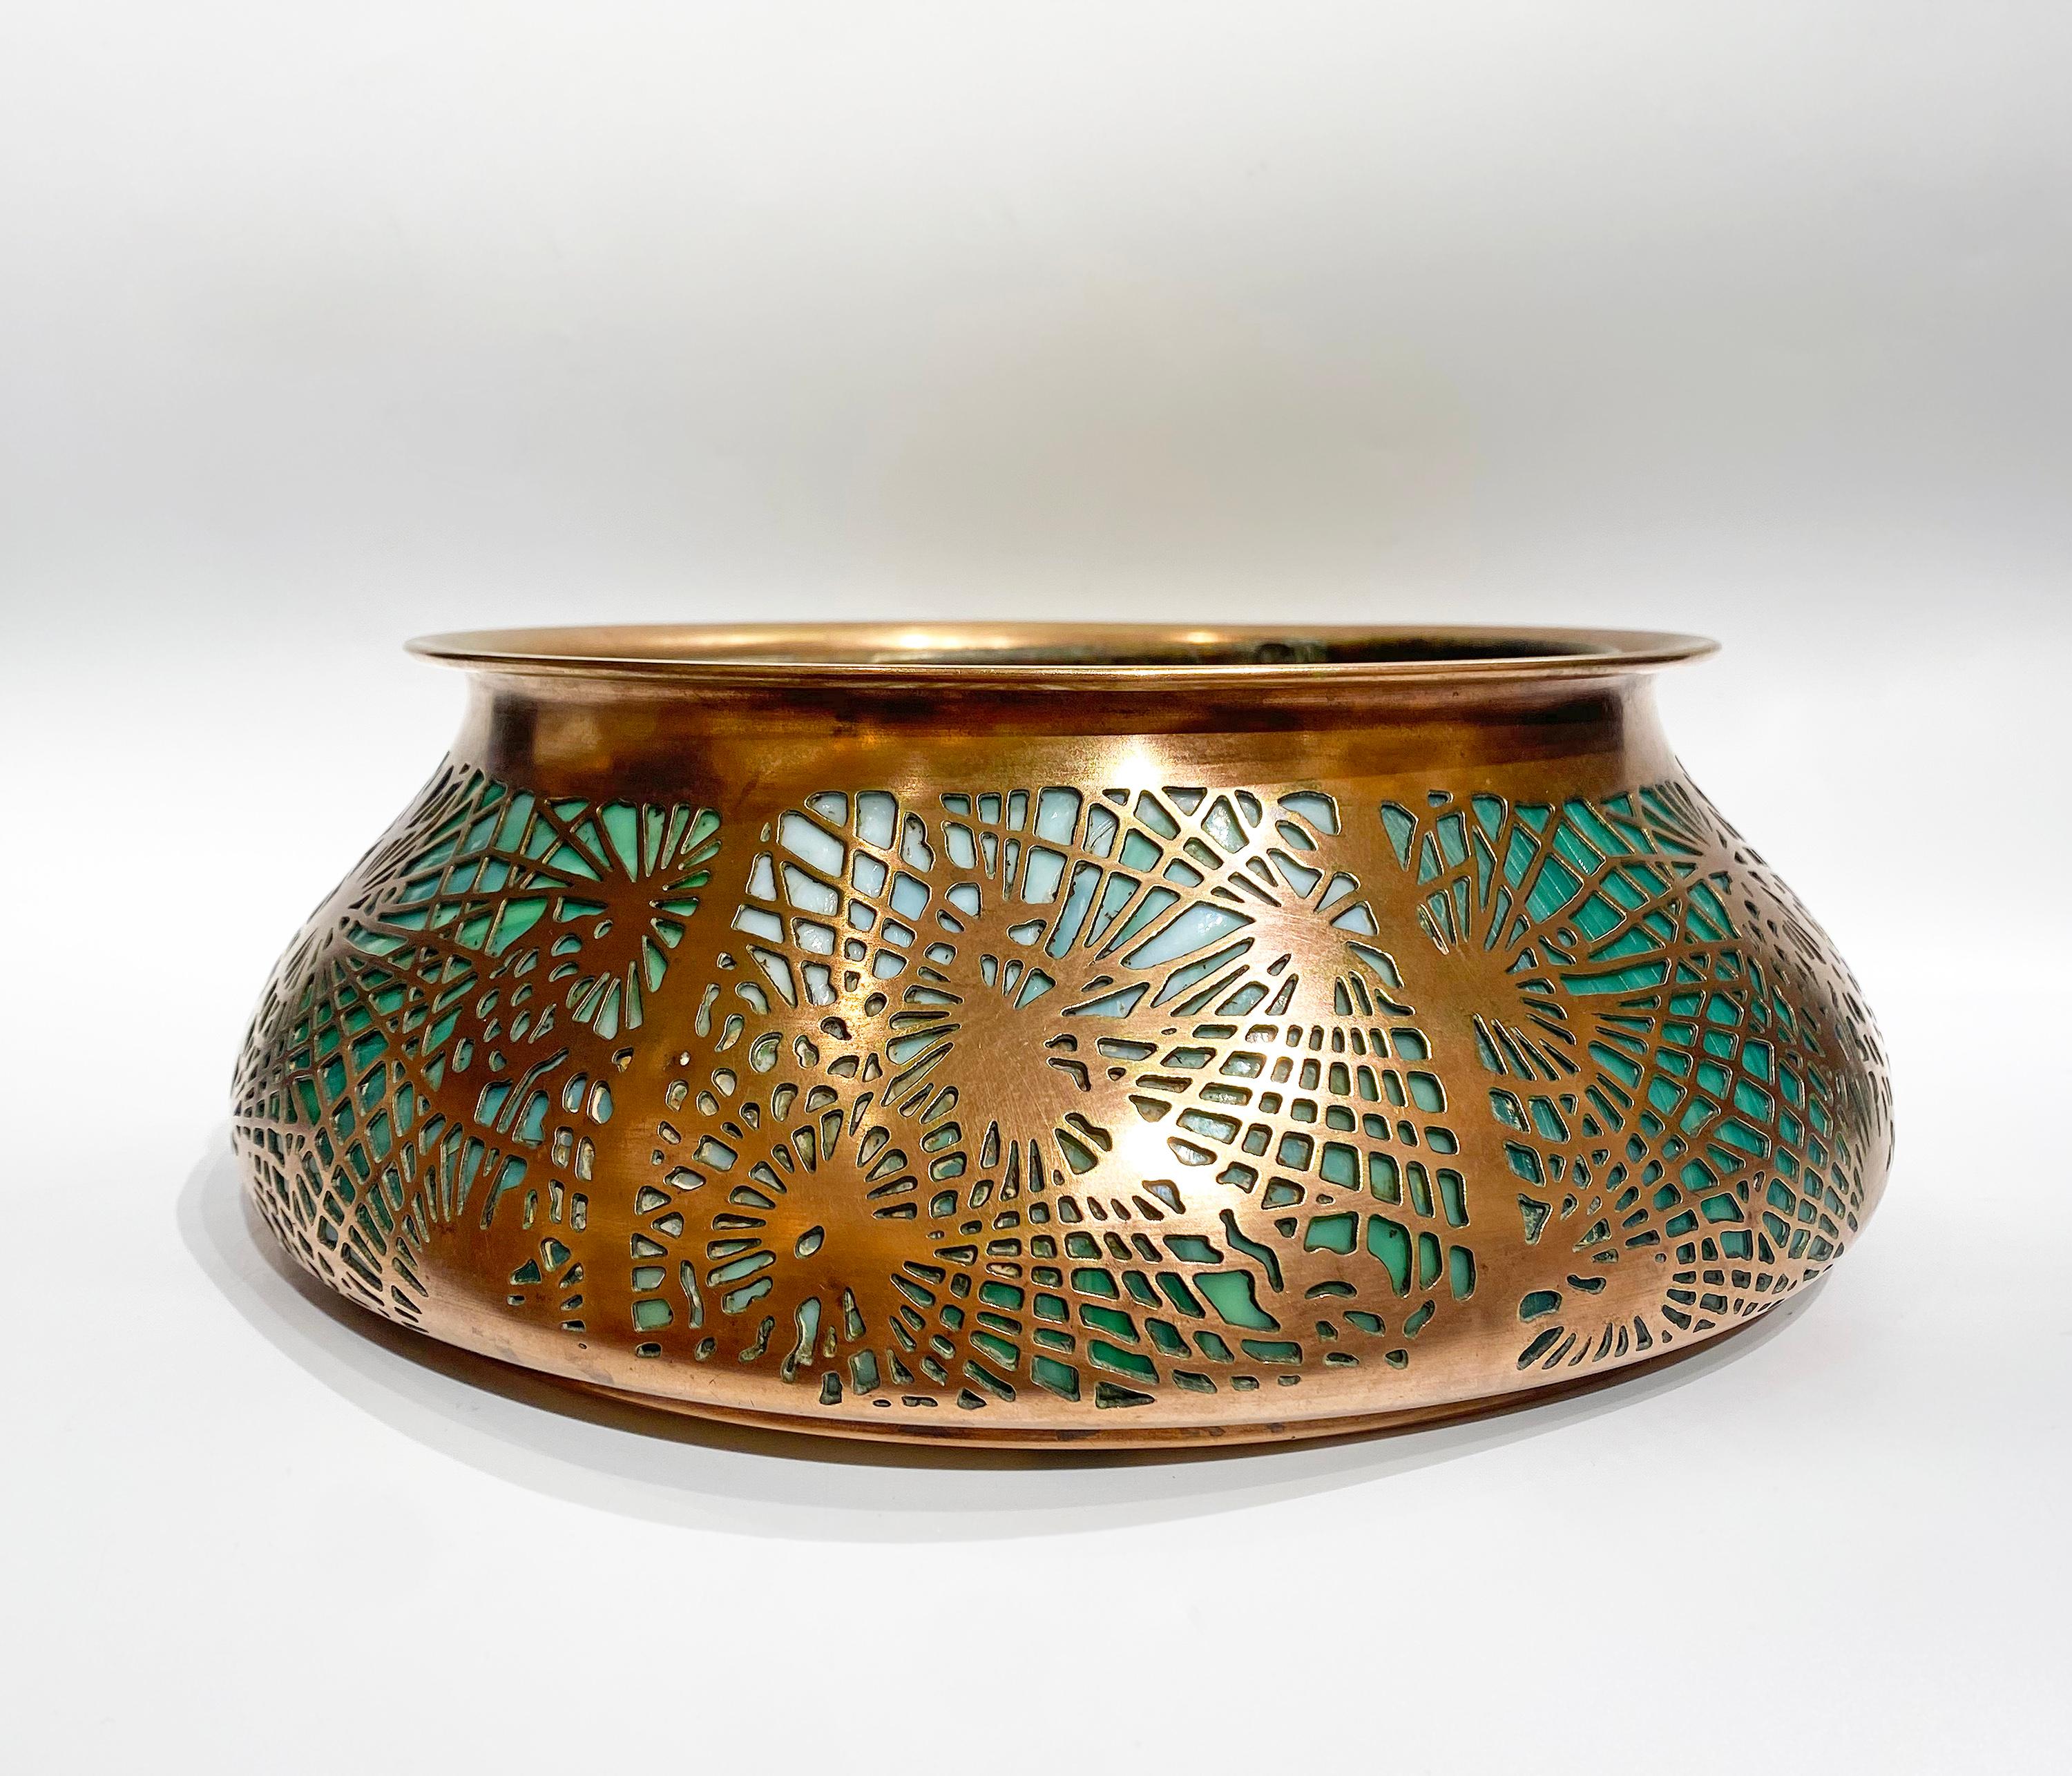 Tiffany Jardiniere with Emerald Favrile Inlay - Art by Louis Comfort Tiffany